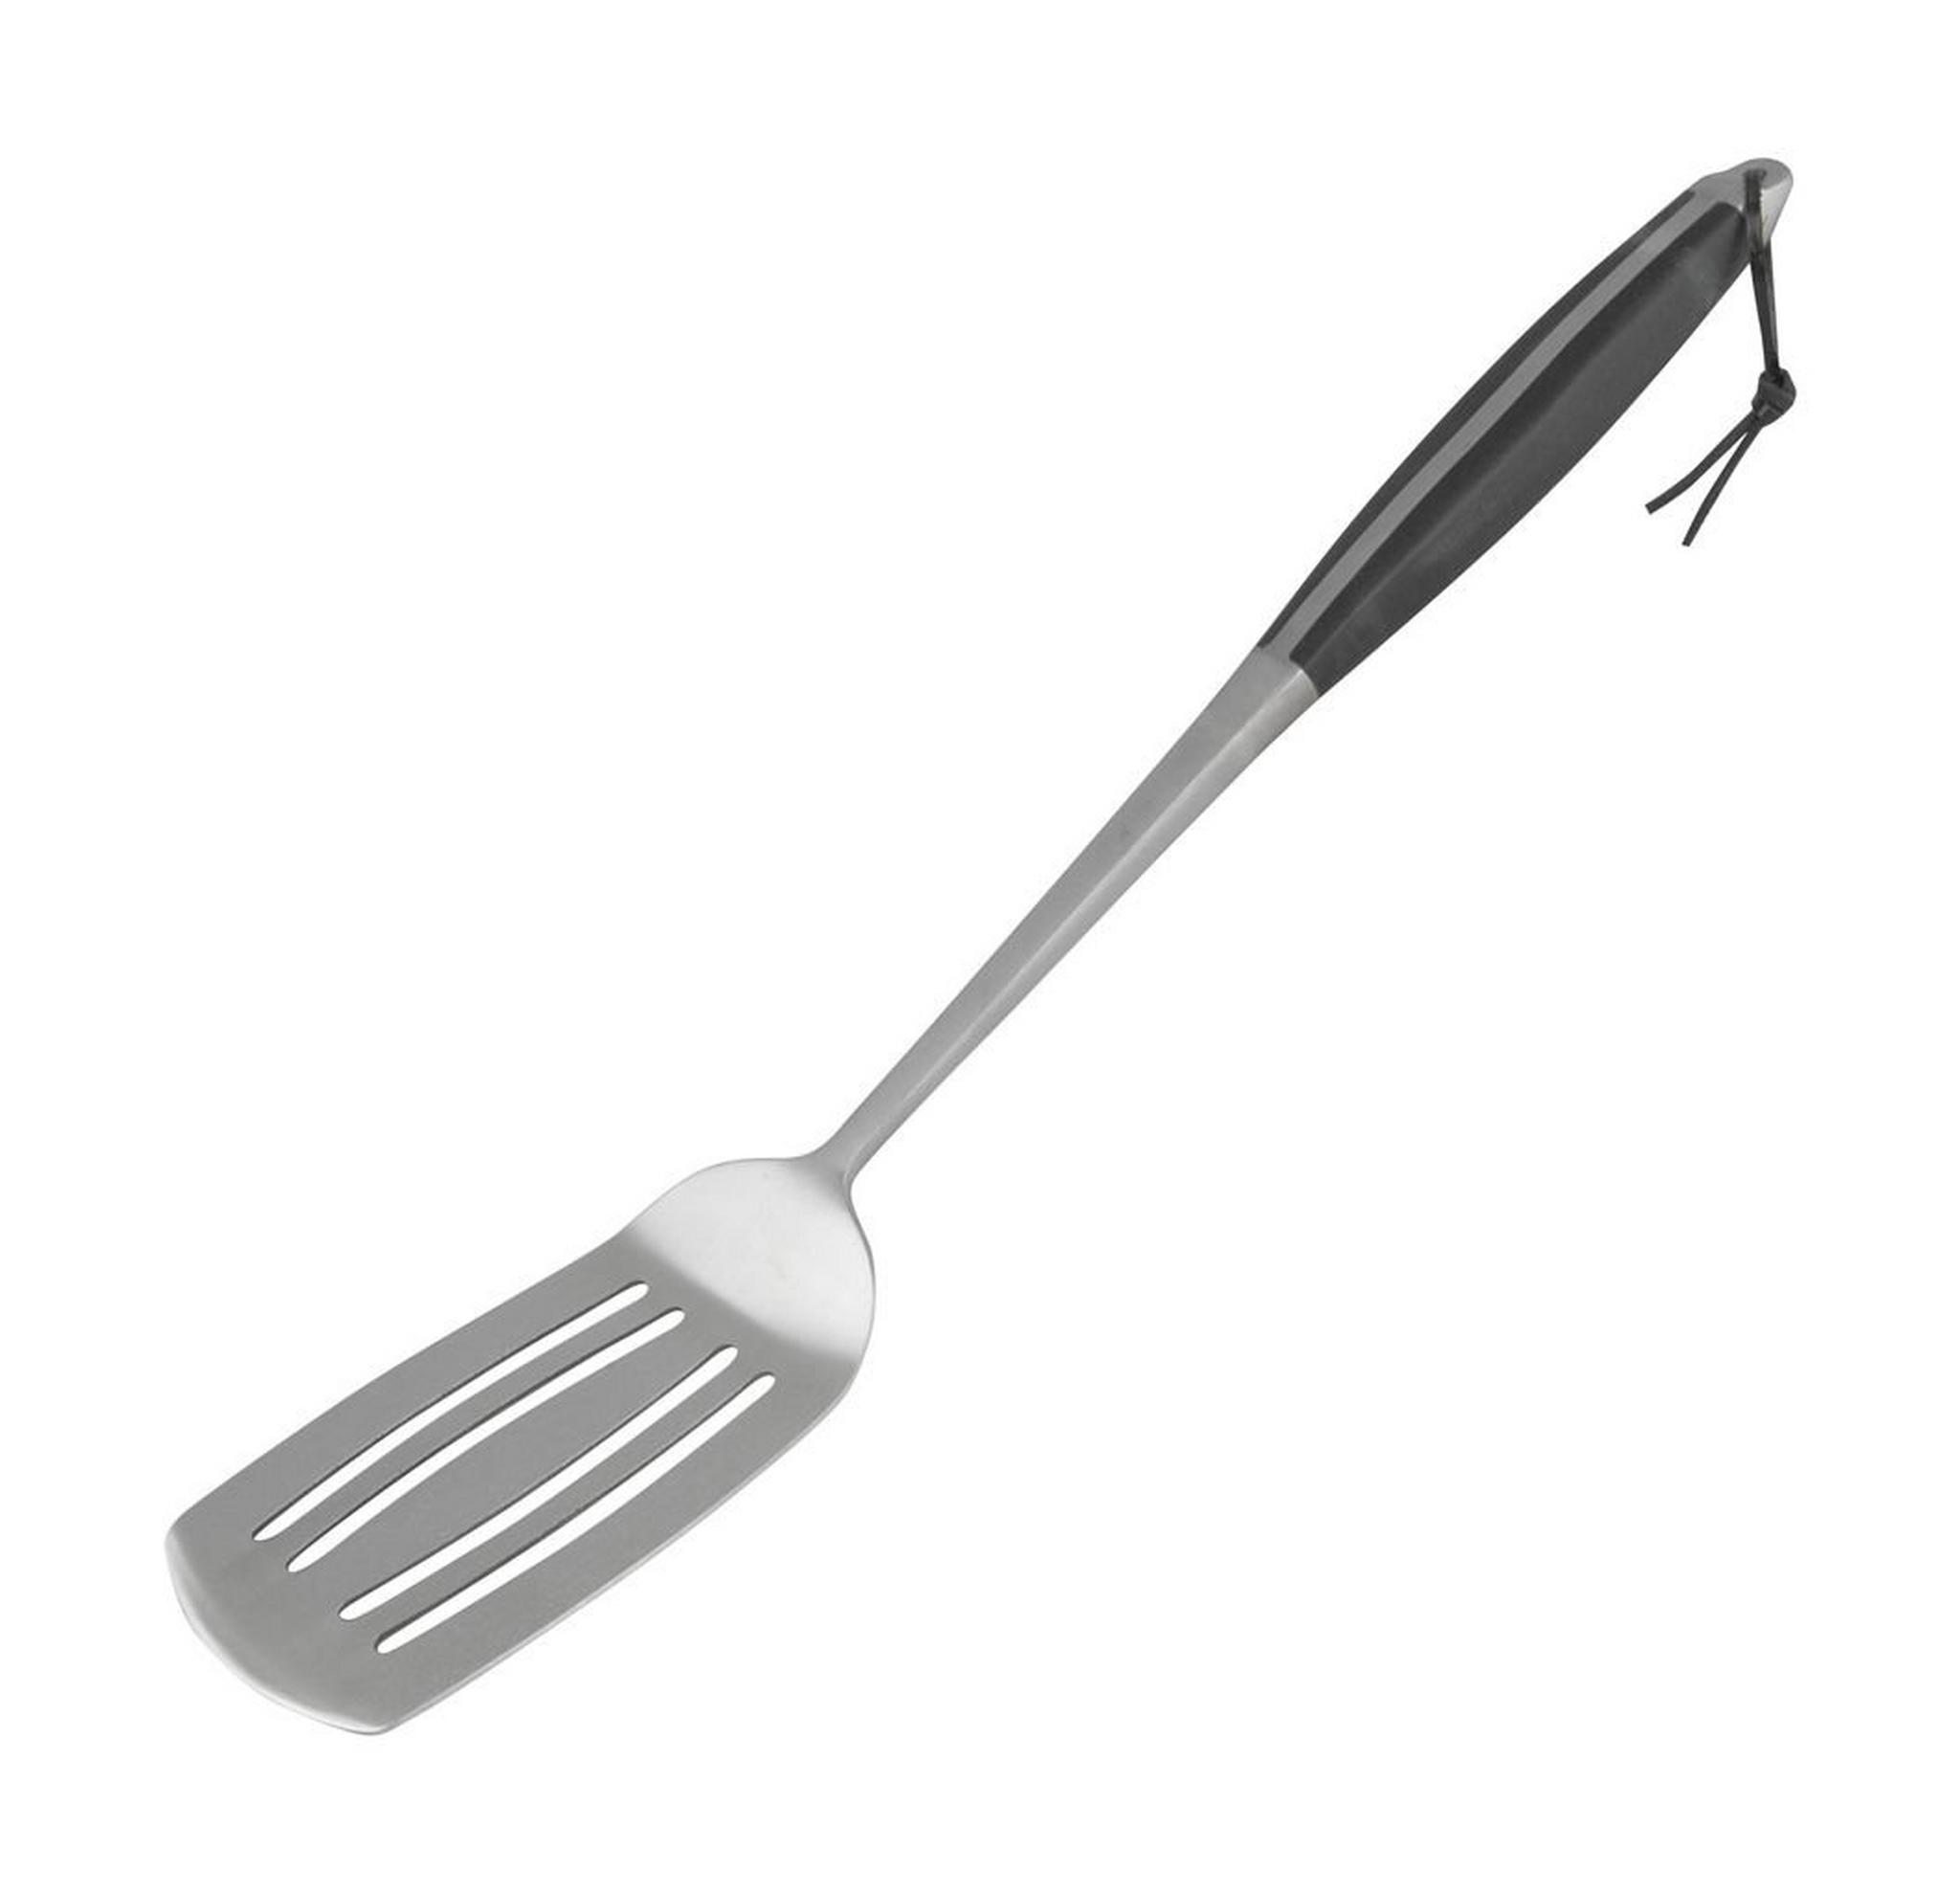 Campingaz Barbecue Stainless Steel Spatula - (2000014564) Stainless Steel